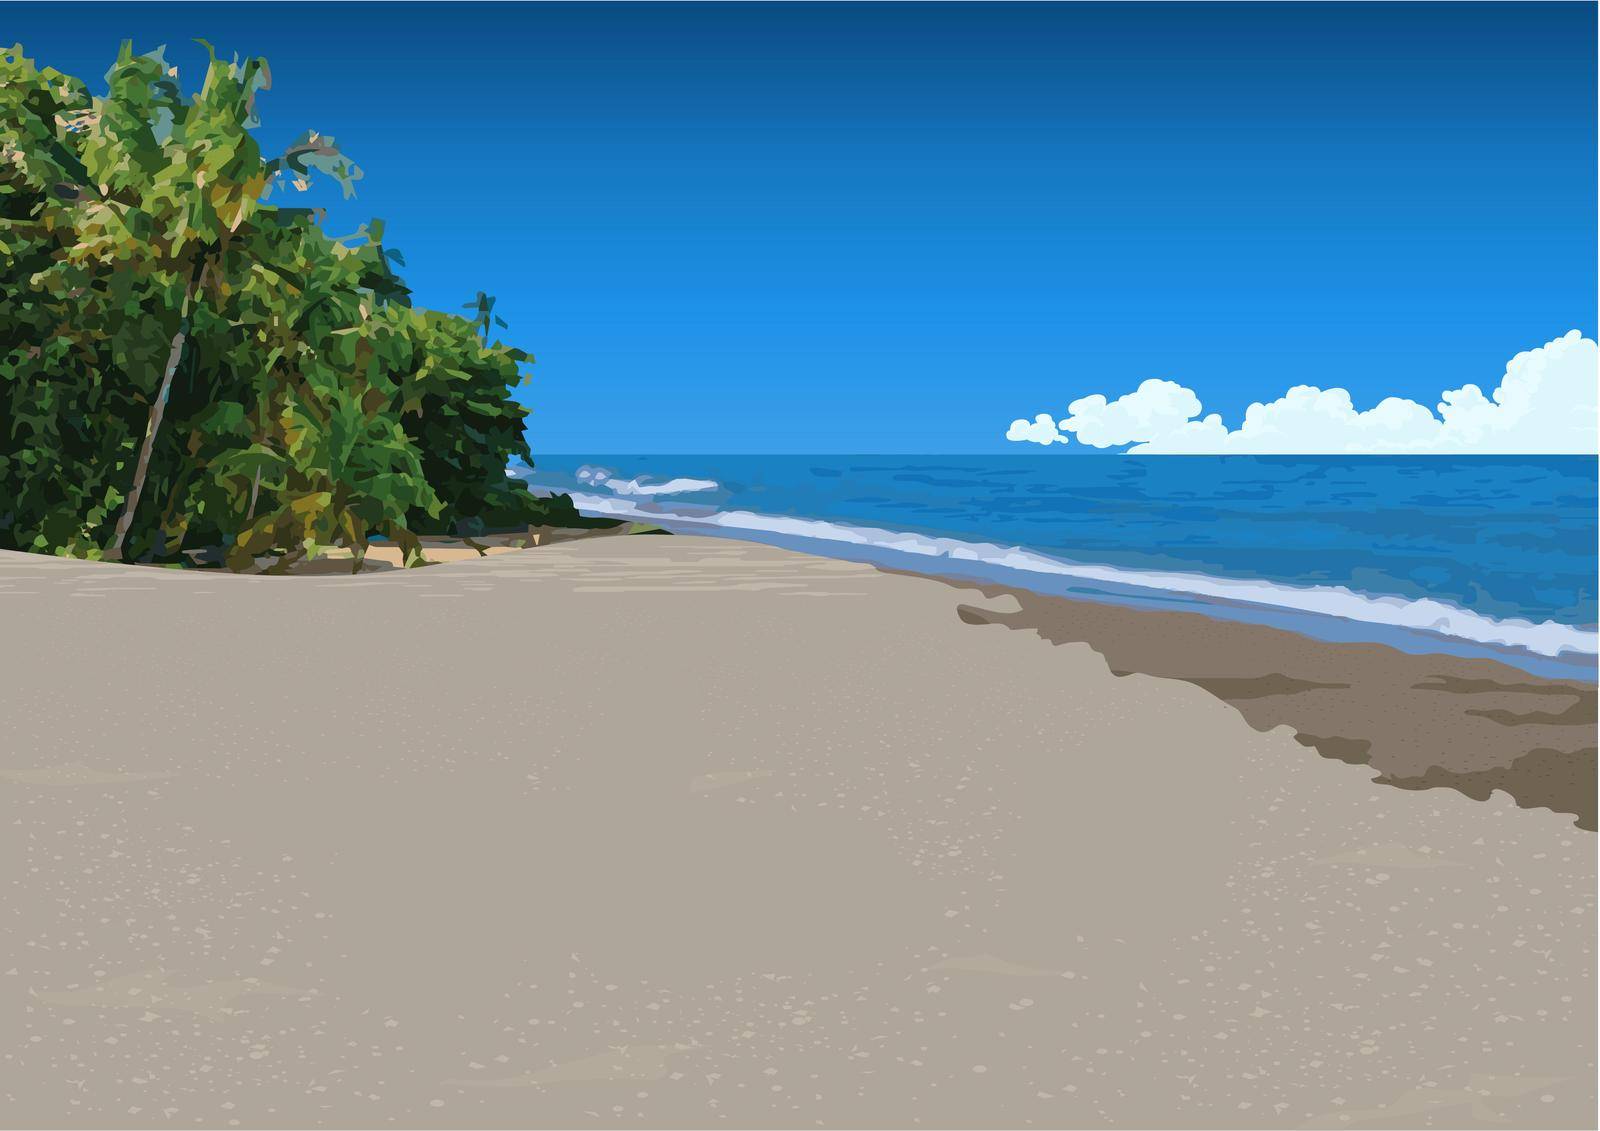 Vector Illustration of Sandy Tropical Beach and Sea in the Background - Graphic Design Element for Your Summer Illustrations, Vector